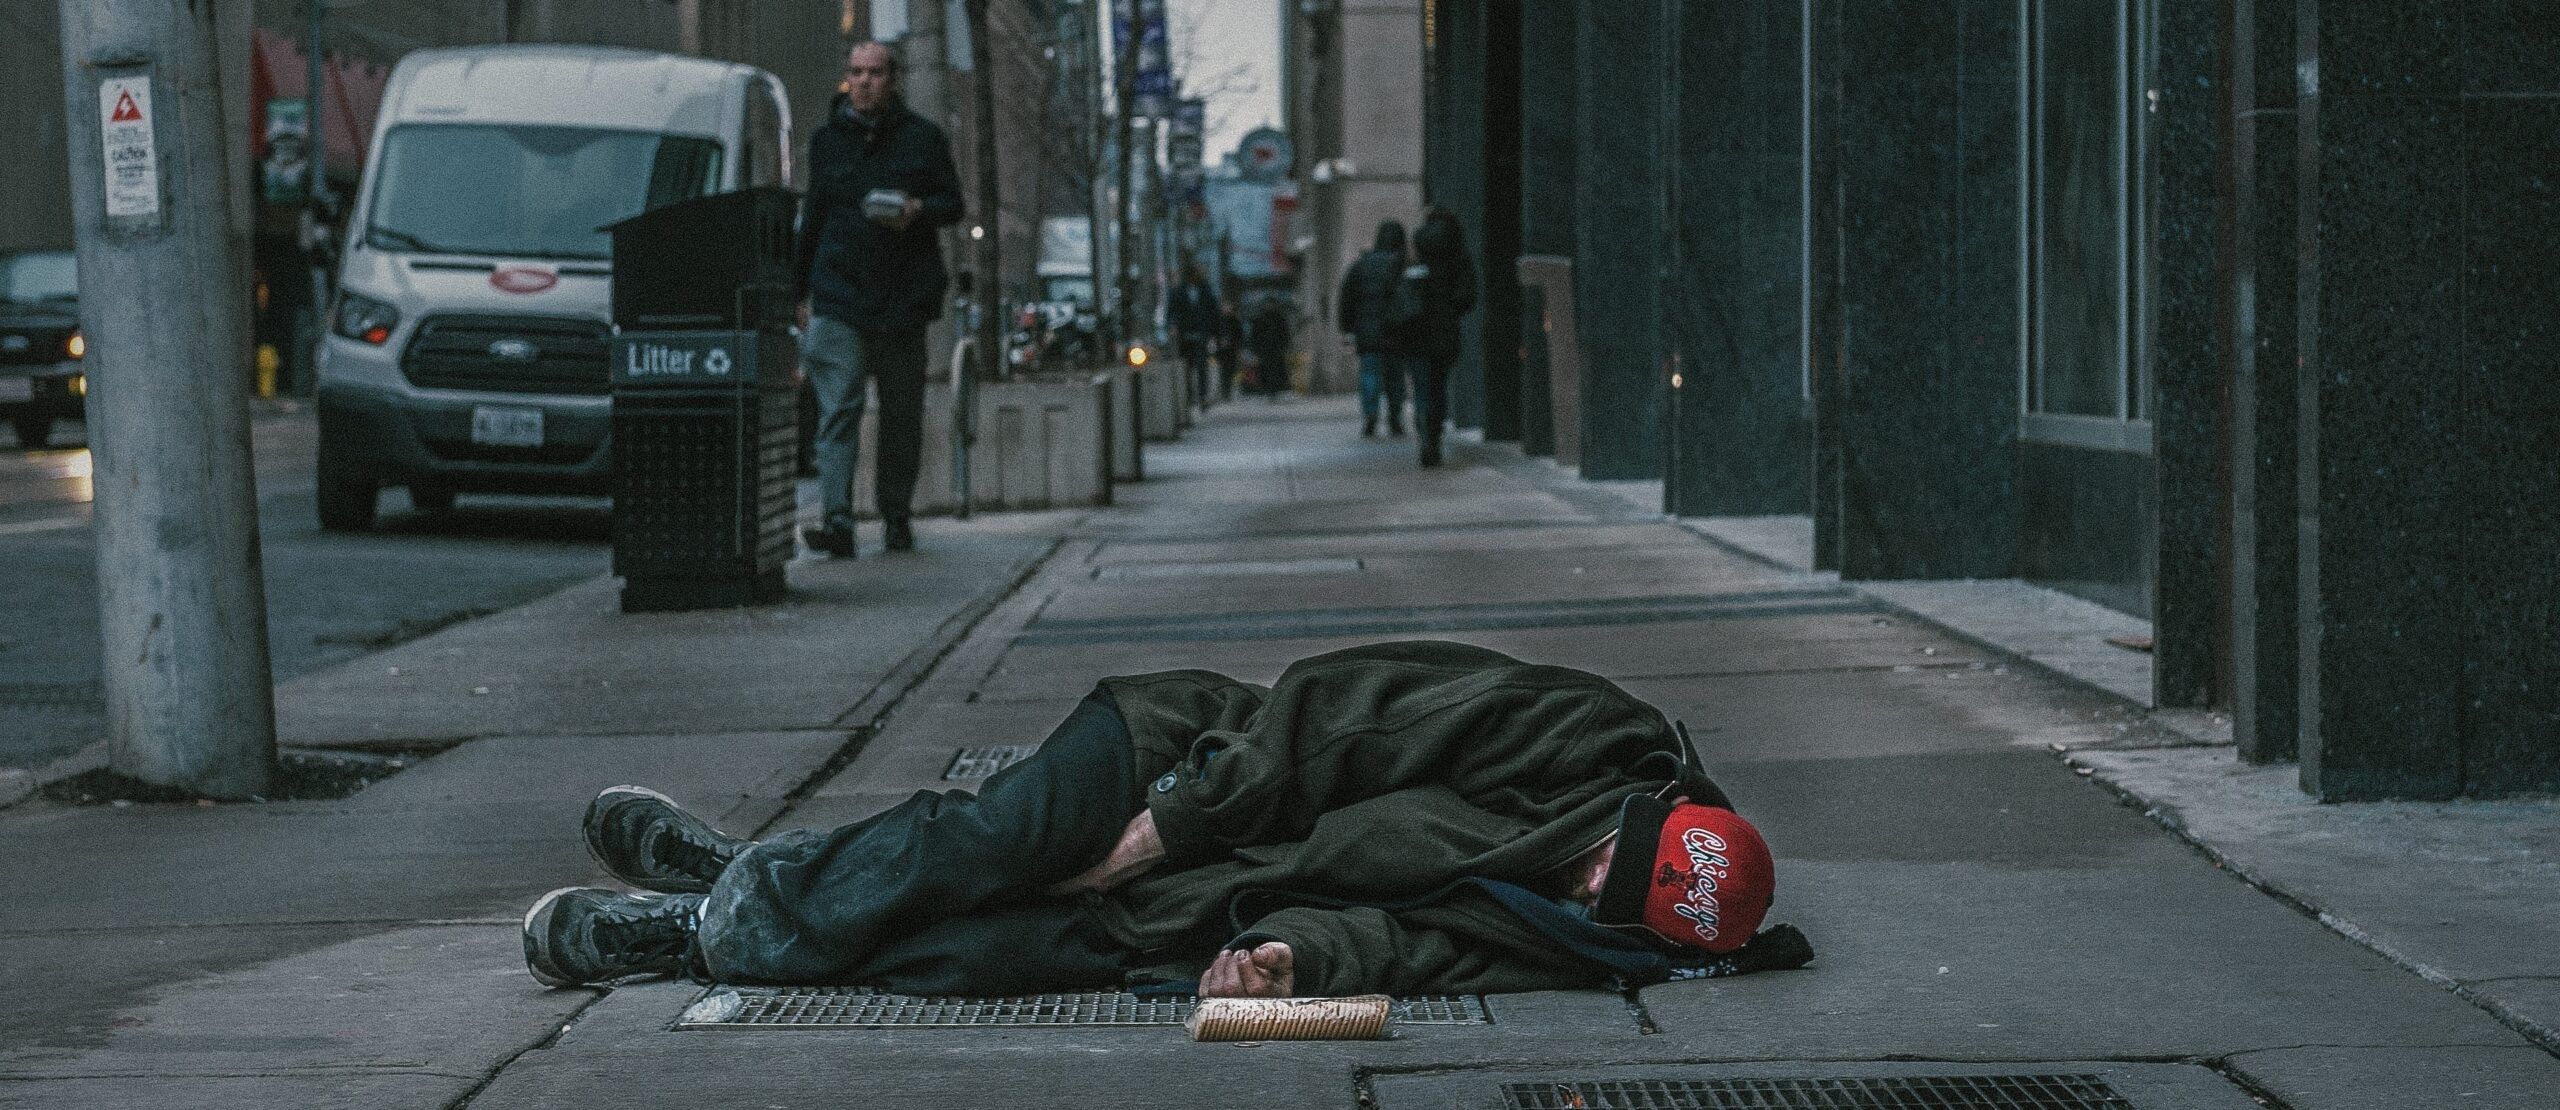 A stock photo of a homeless man lying in the middle of a street.